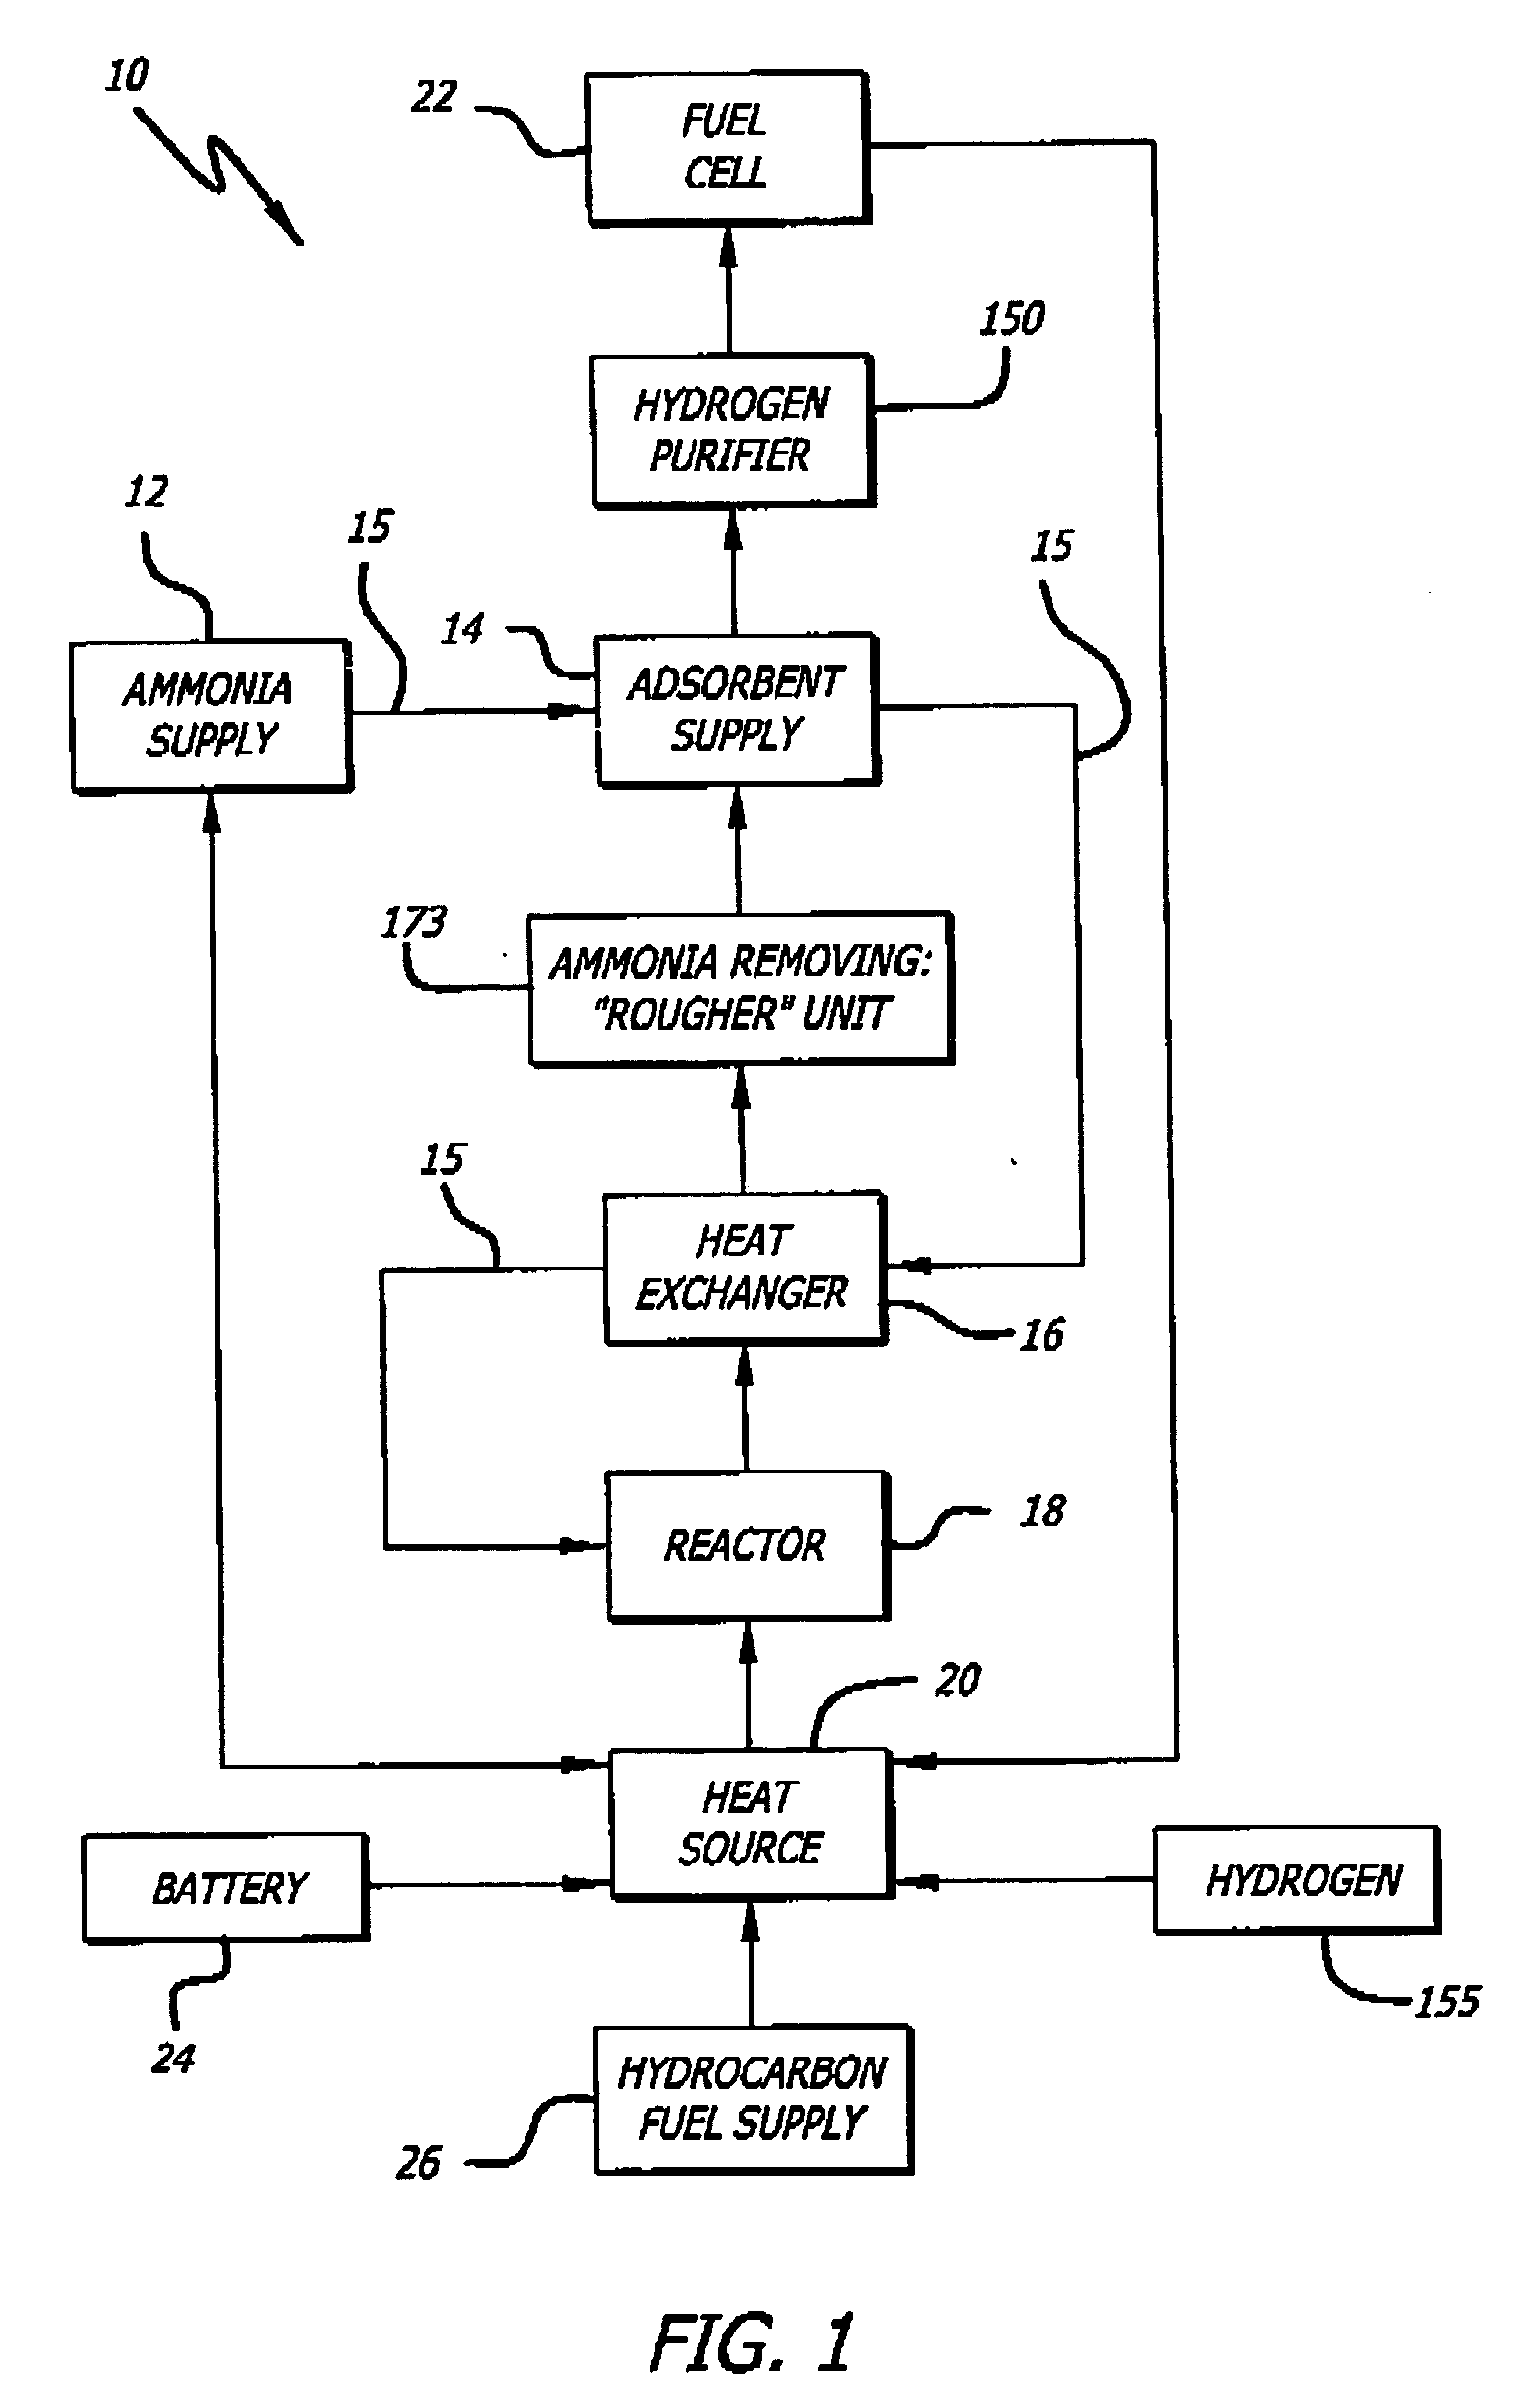 Ammonia-based hydrogen generation apparatus and method for using same